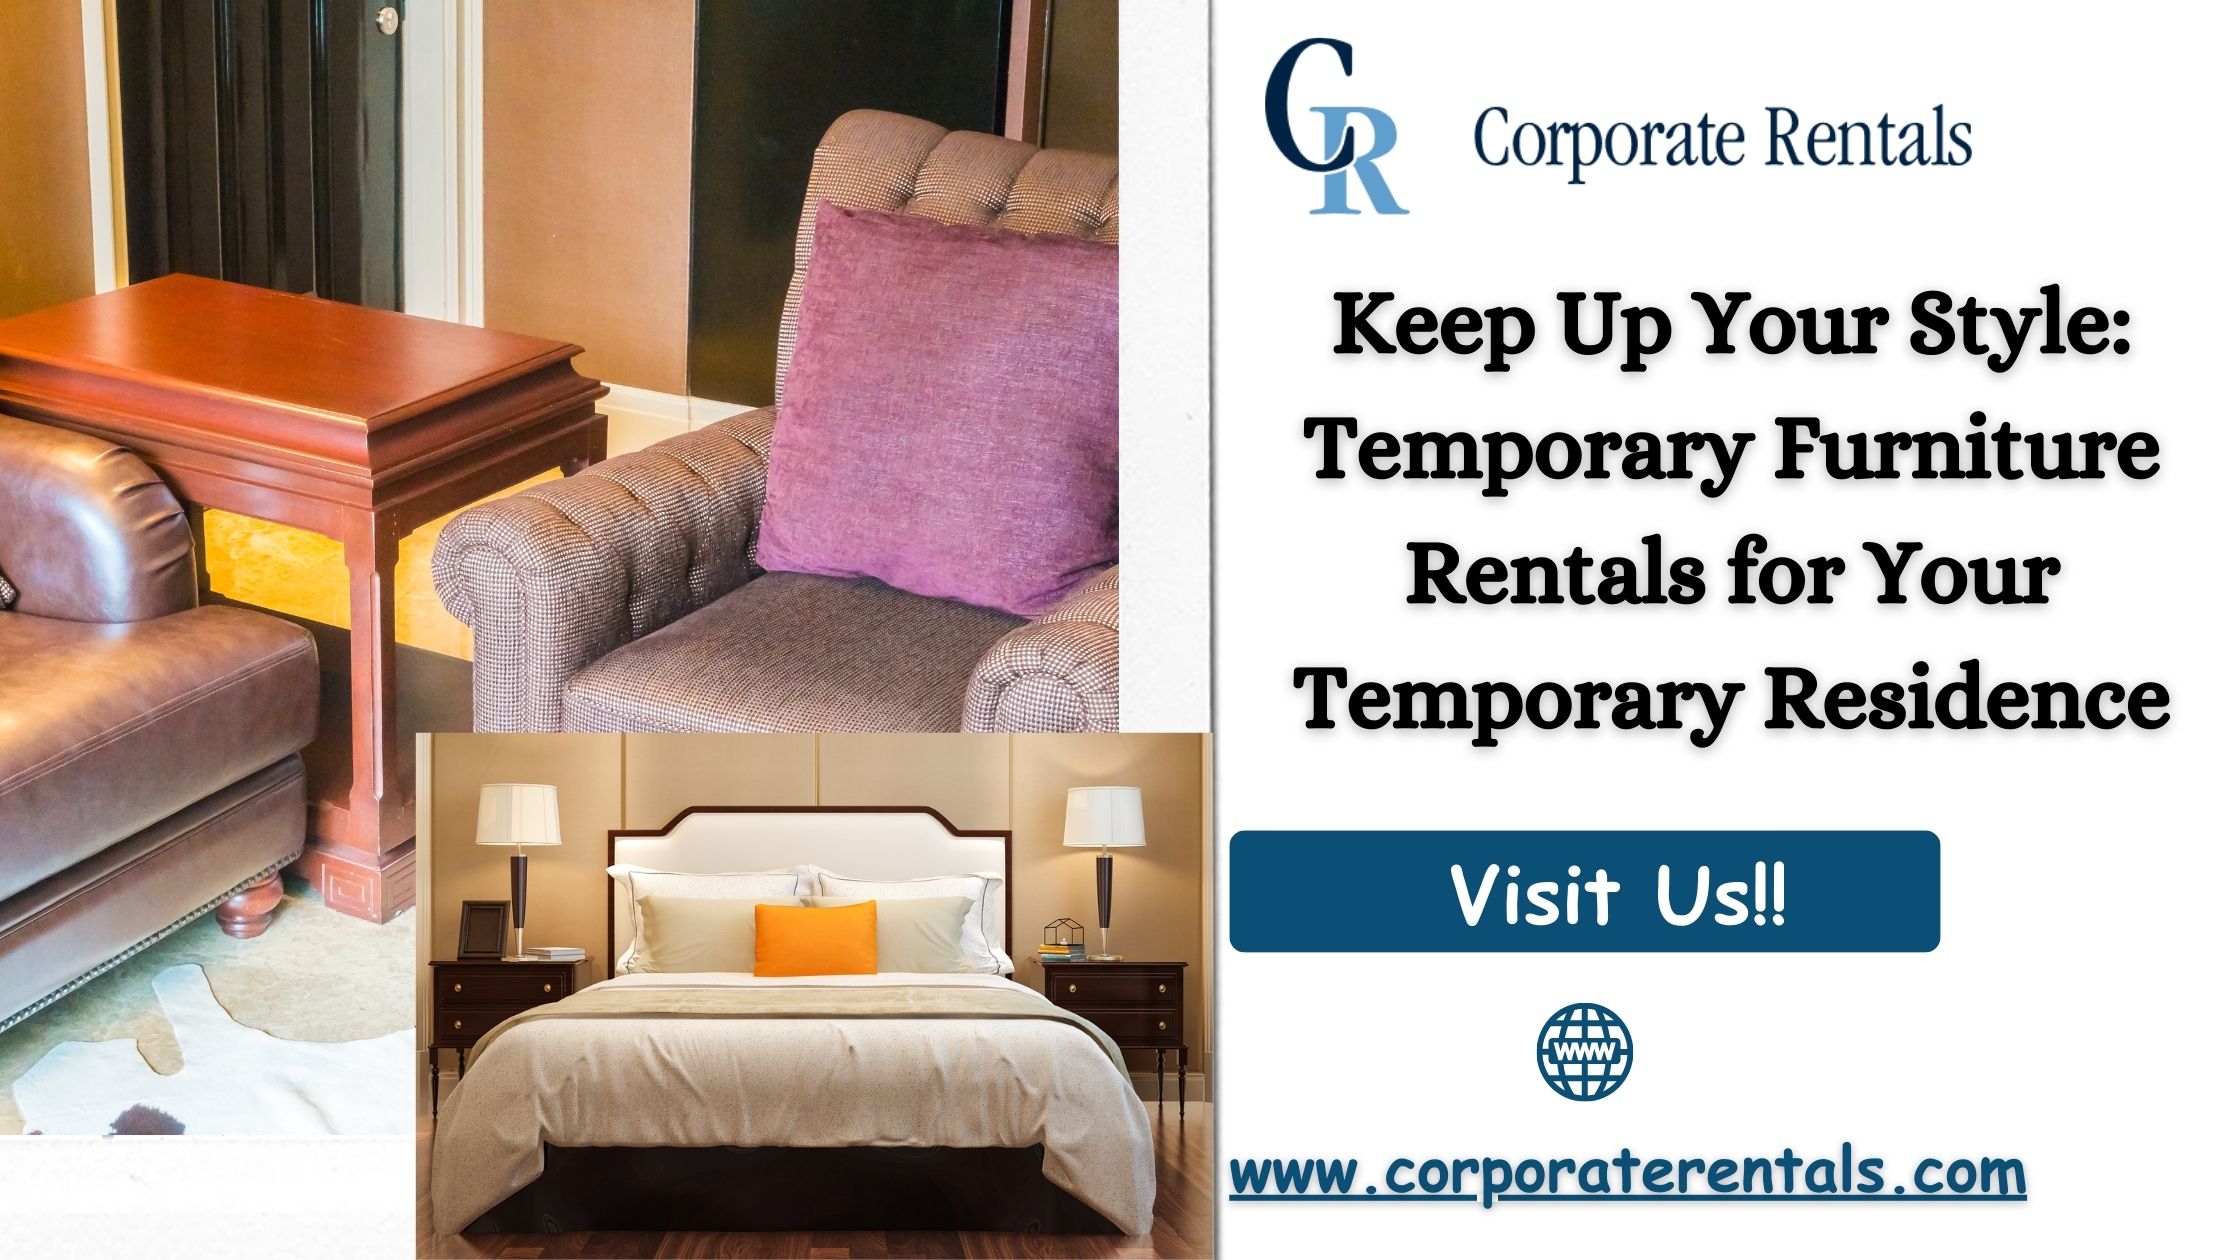 Keep Up Your Style: Temporary Furniture Rentals for Your Temporary Residence